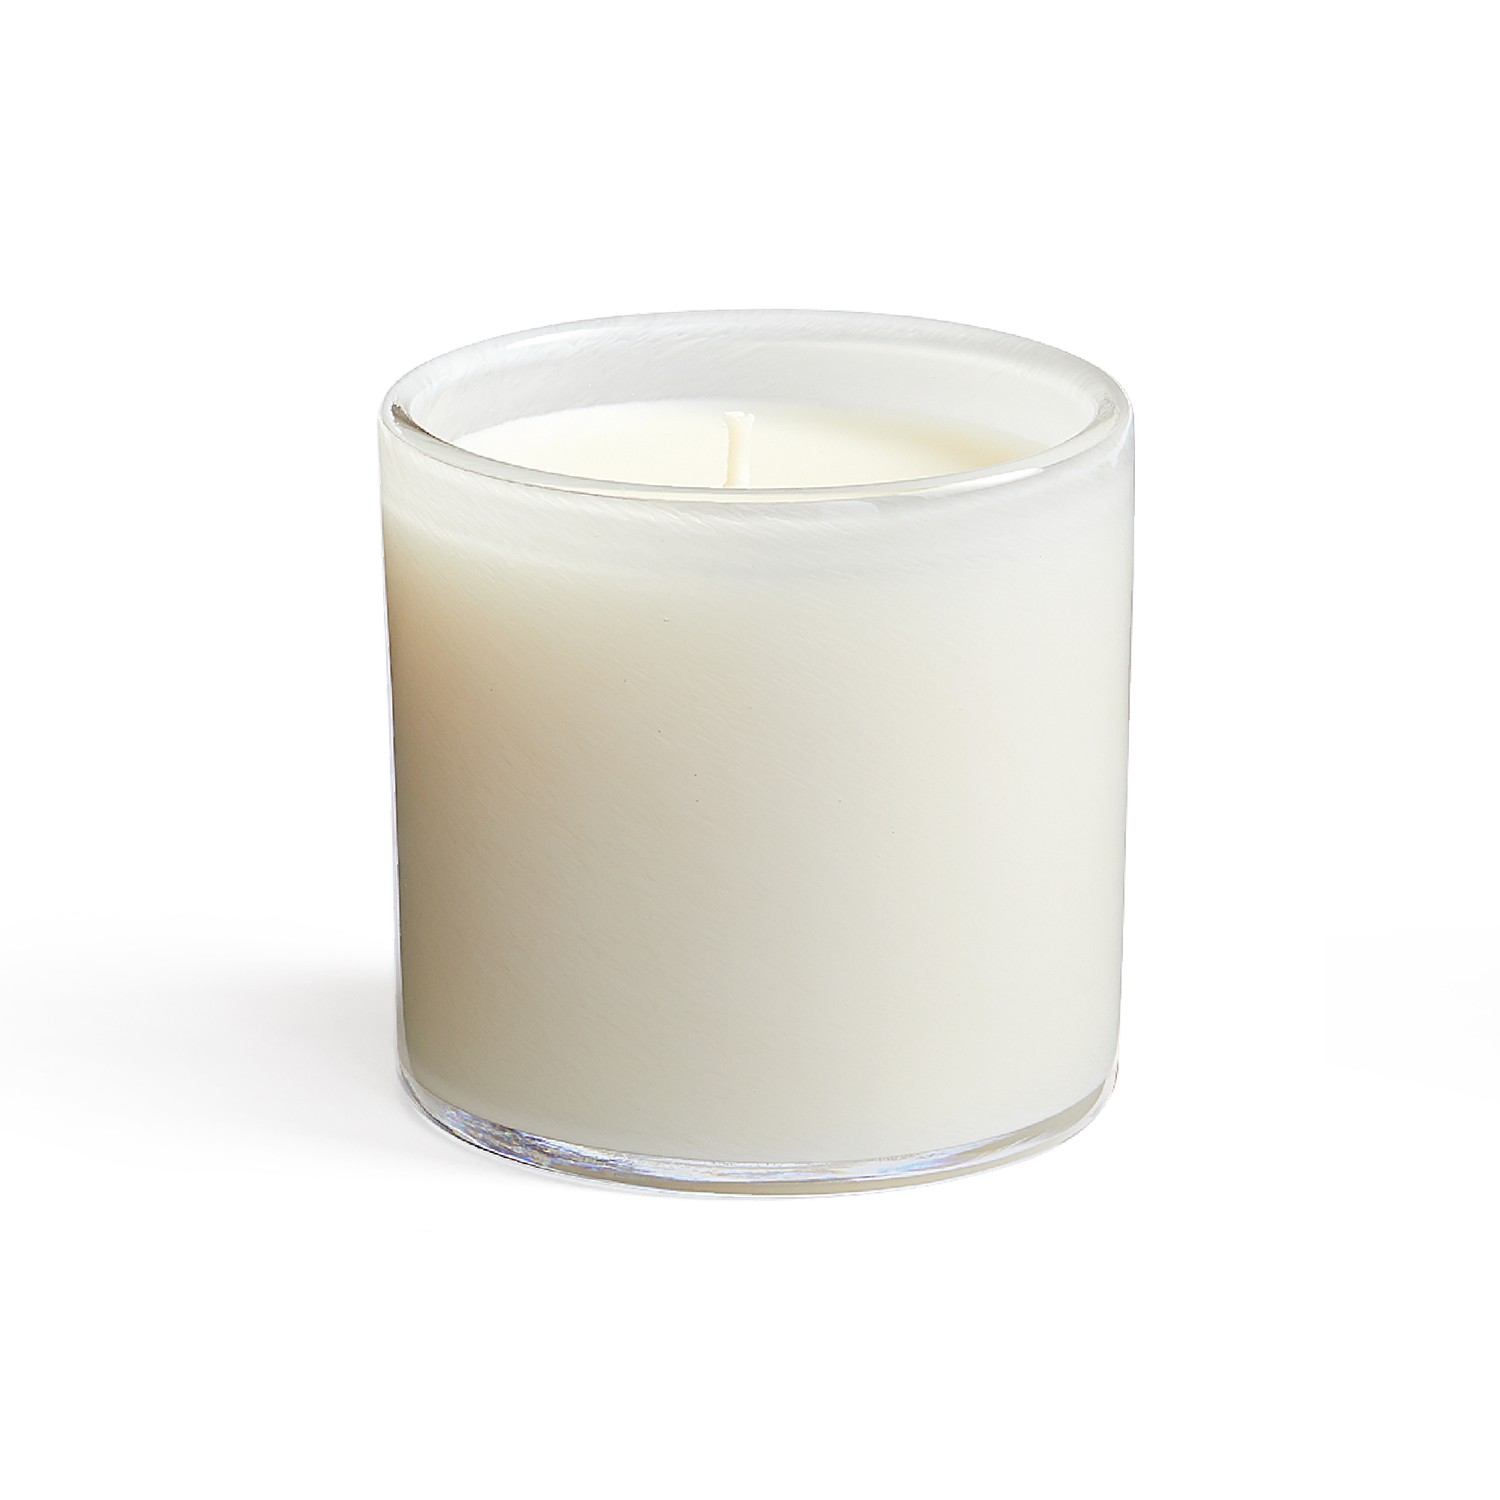 Celery Thyme Signature Candle